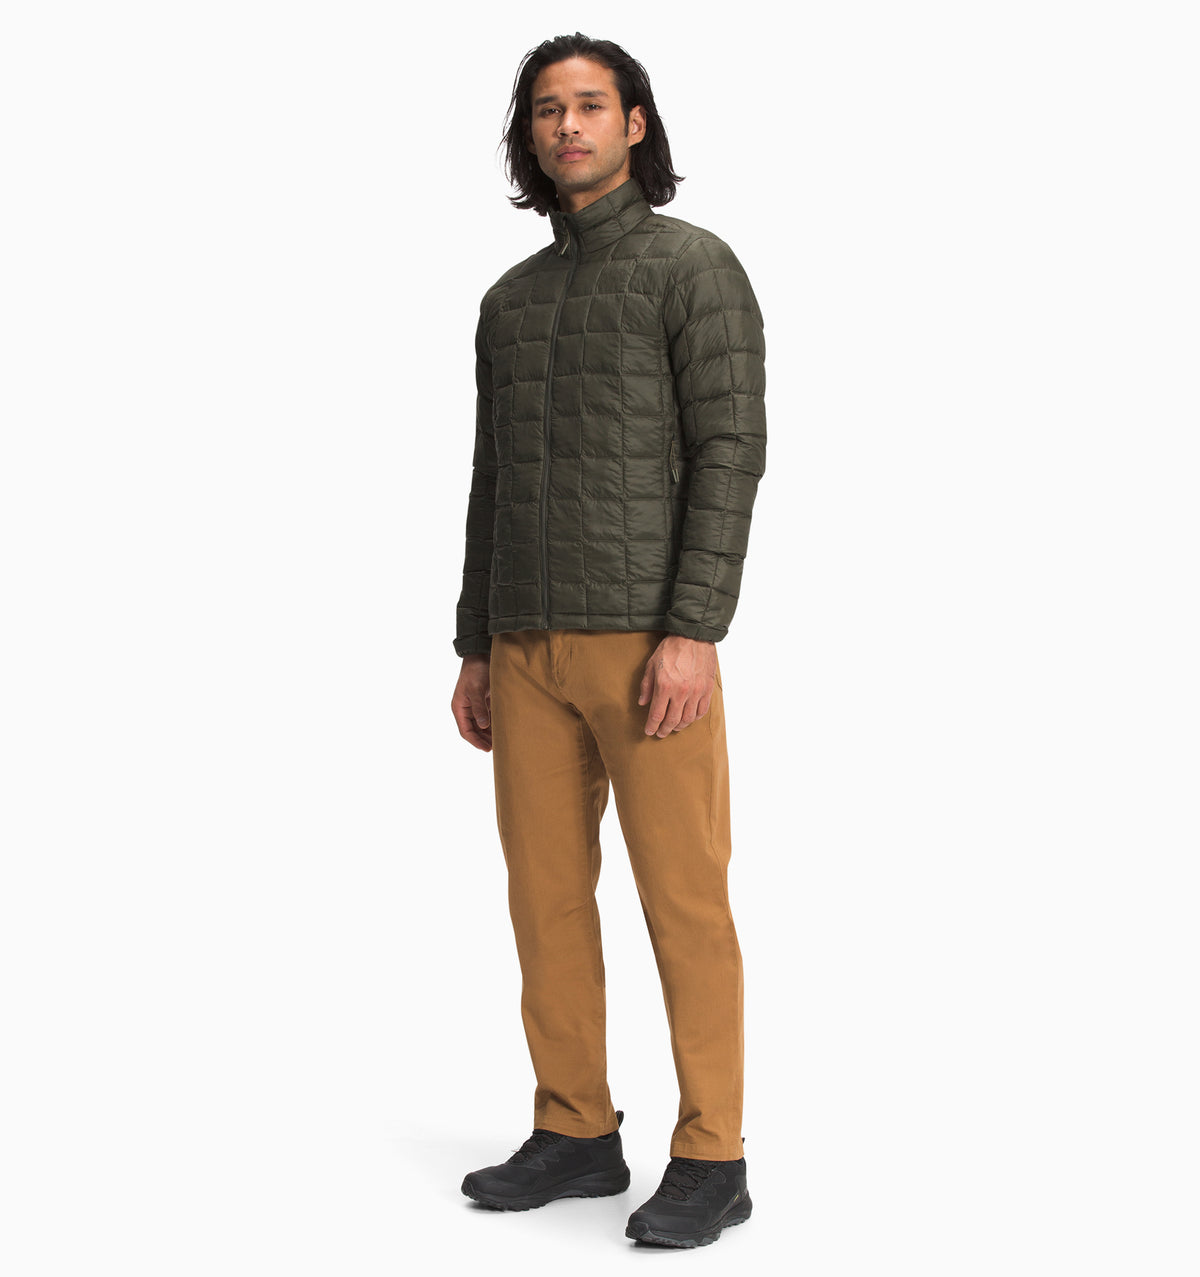 The North Face Men's ThermoBall Eco Jacket - New Taupe Green